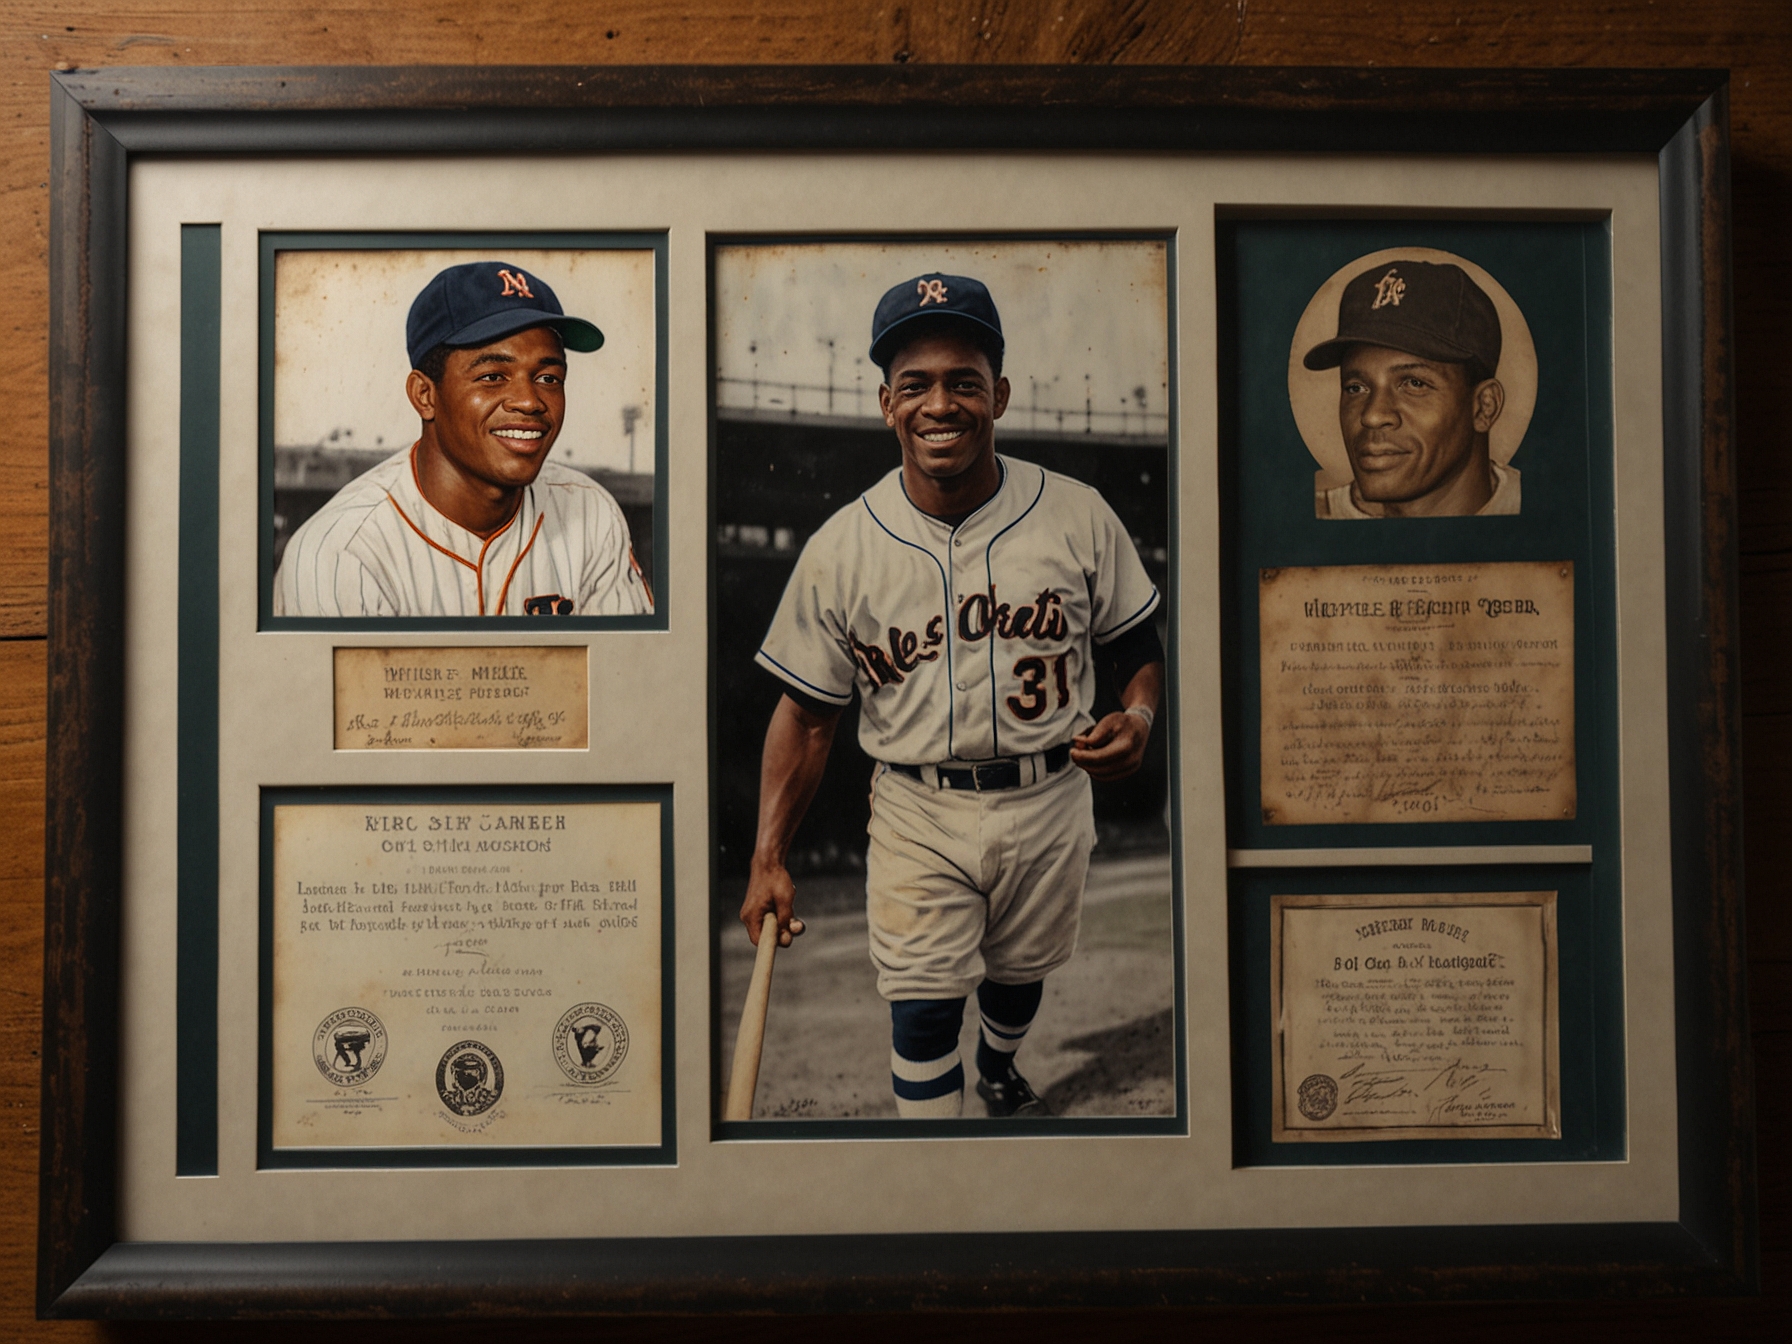 Memorabilia from the Negro Leagues, including photos and equipment, displayed at Rickwood Field to honor Willie Mays and the contributions of African-American players.